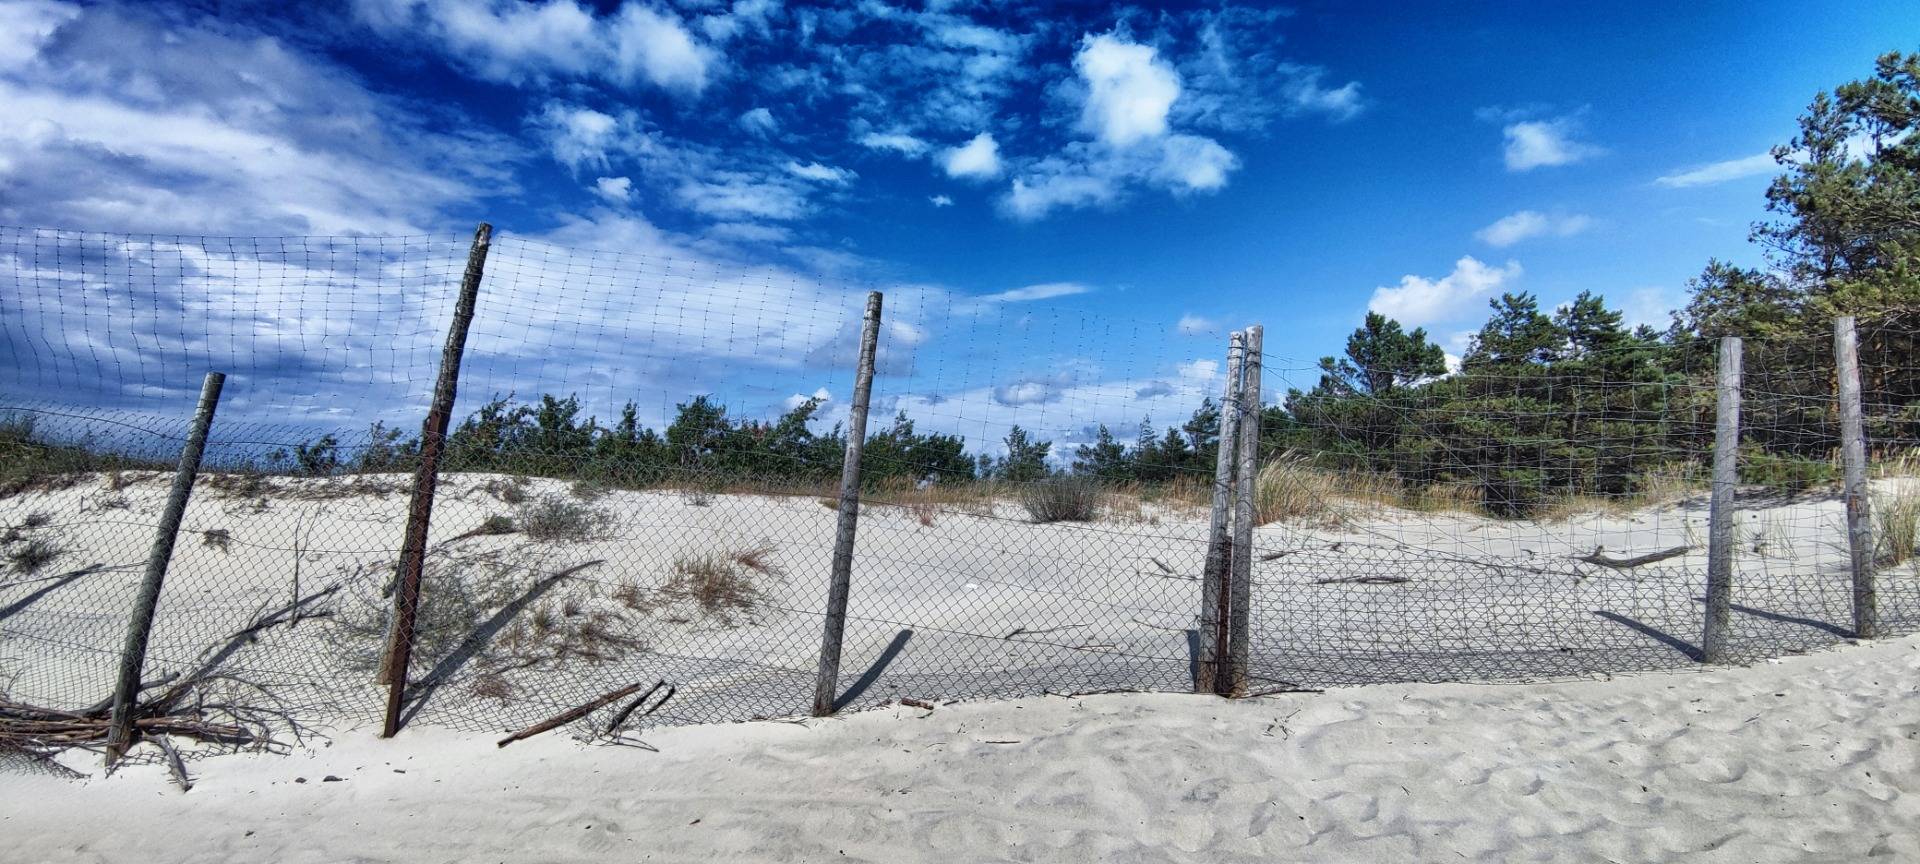 Trip to Polands spit: Walking to the edge of Europe